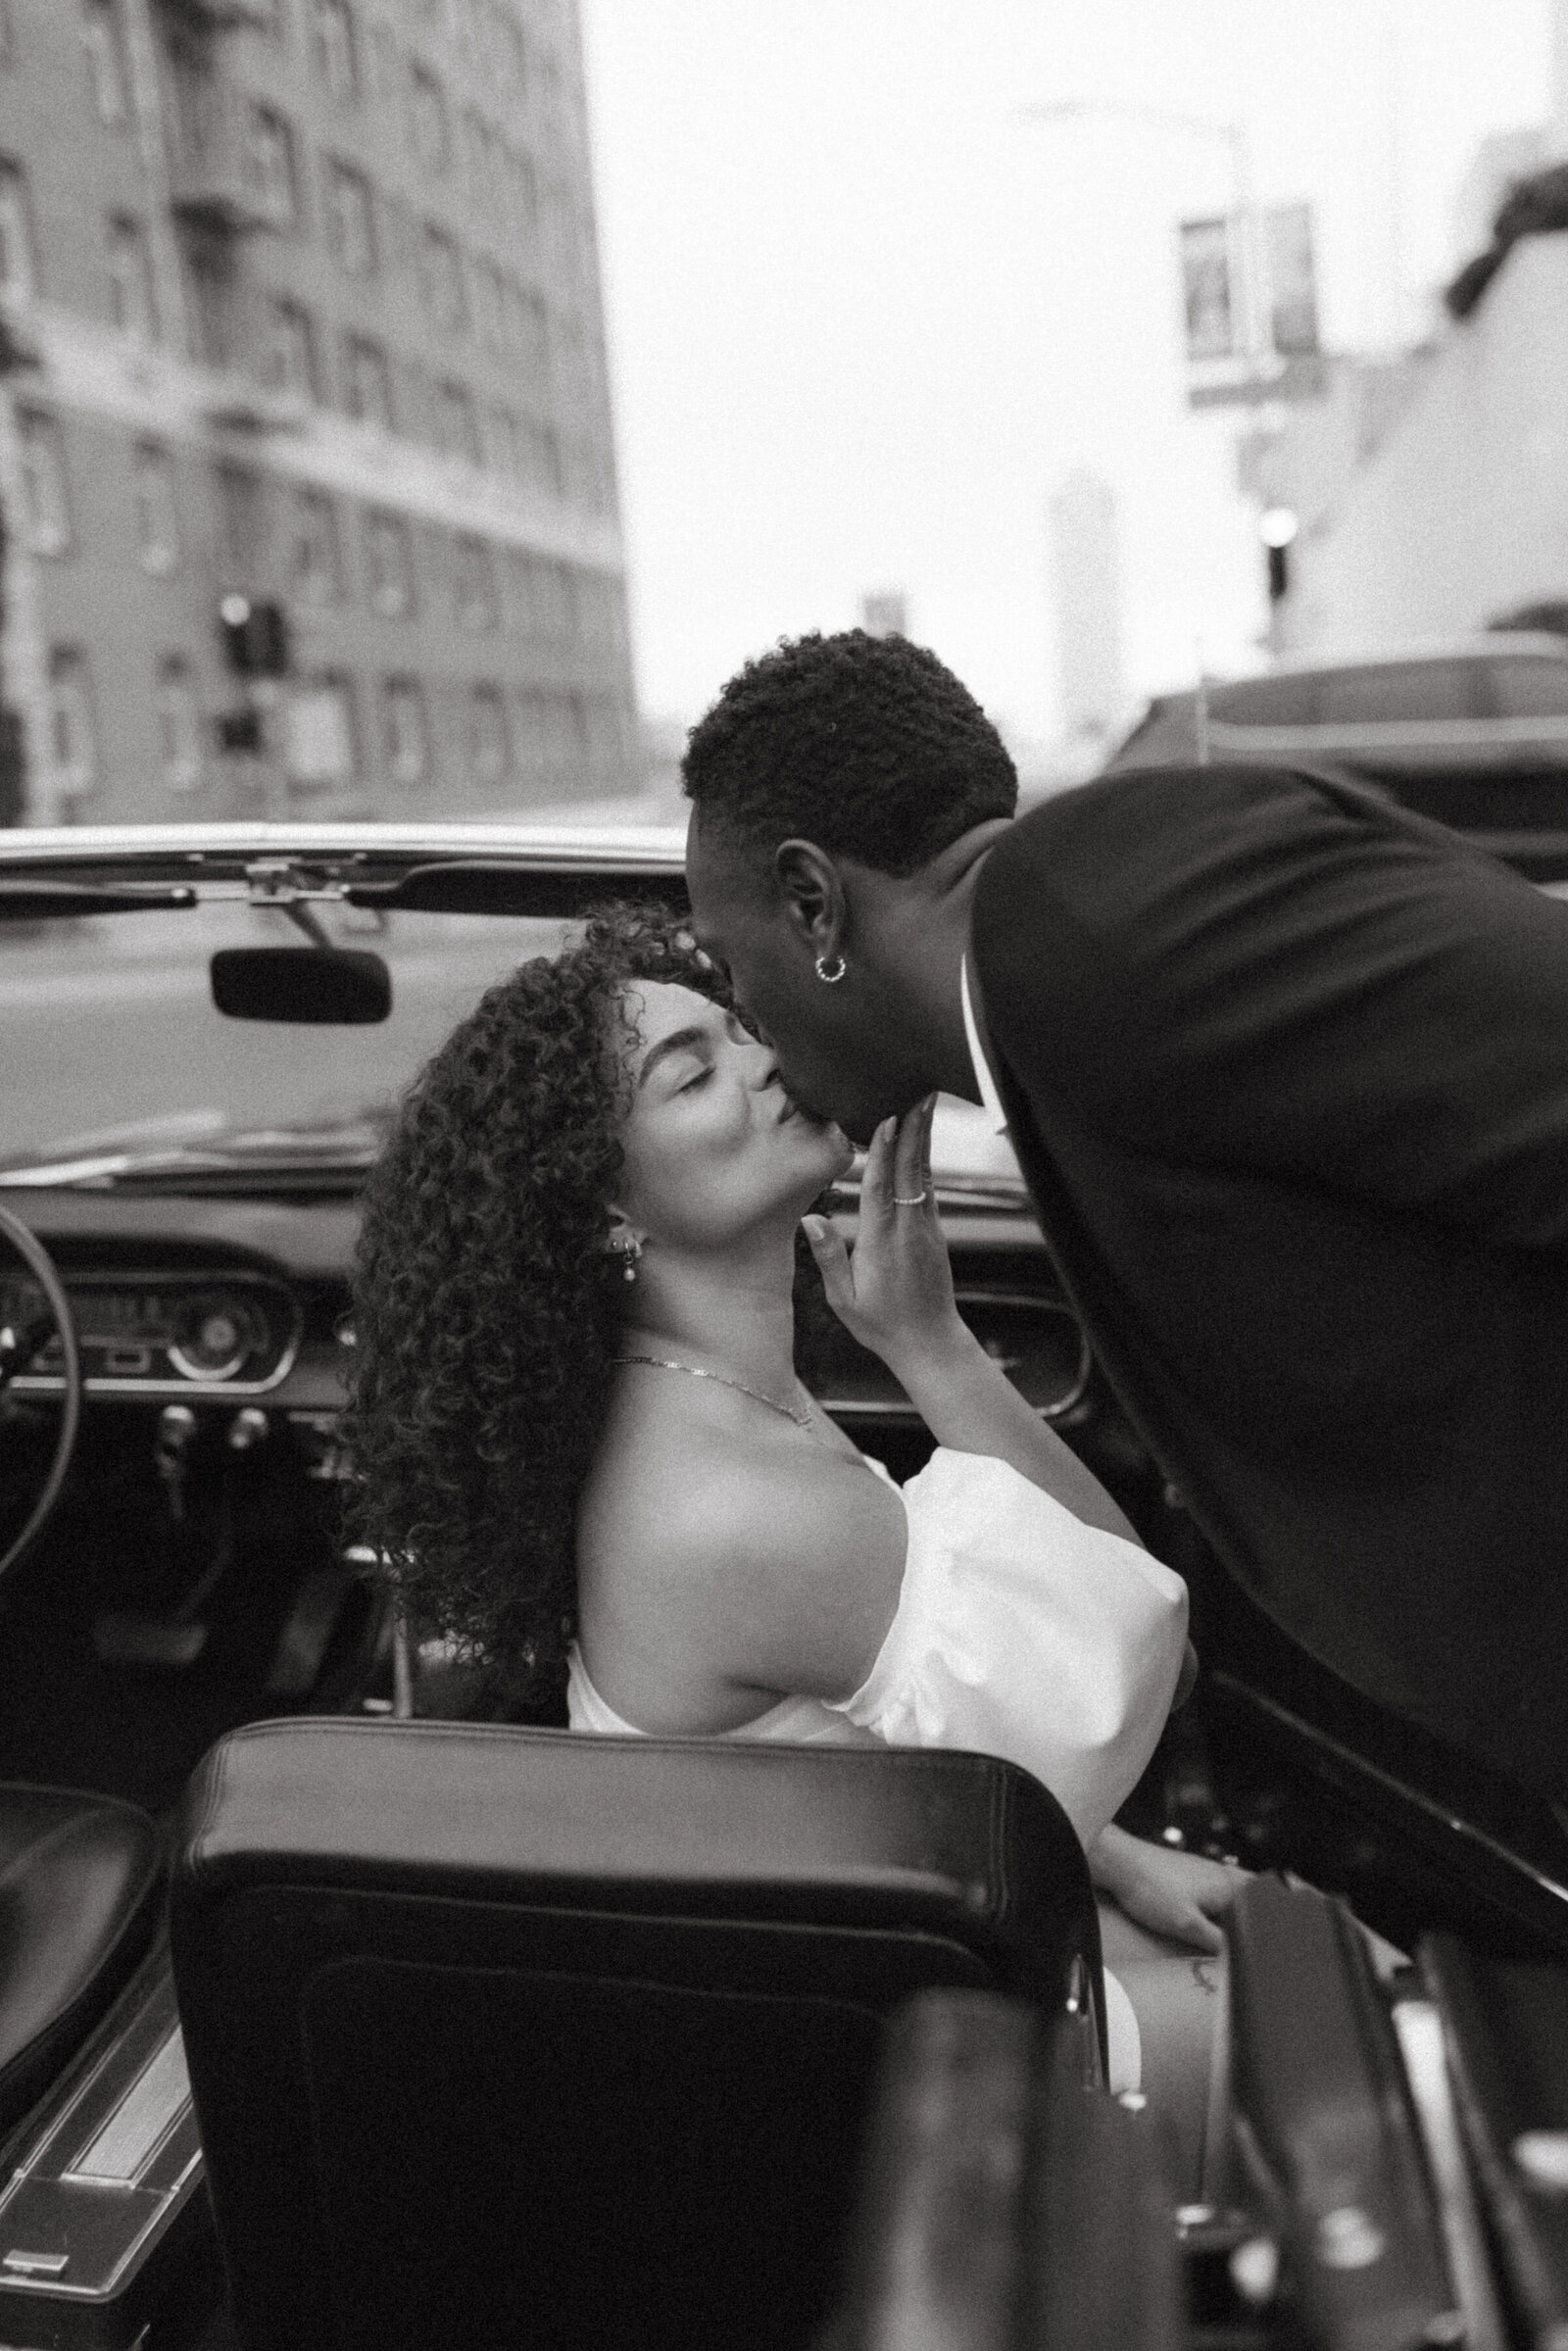 A monochrome photo of a man kissing a woman as they sit in a vintage car in San Francisco, conveying a tender moment between the couple.